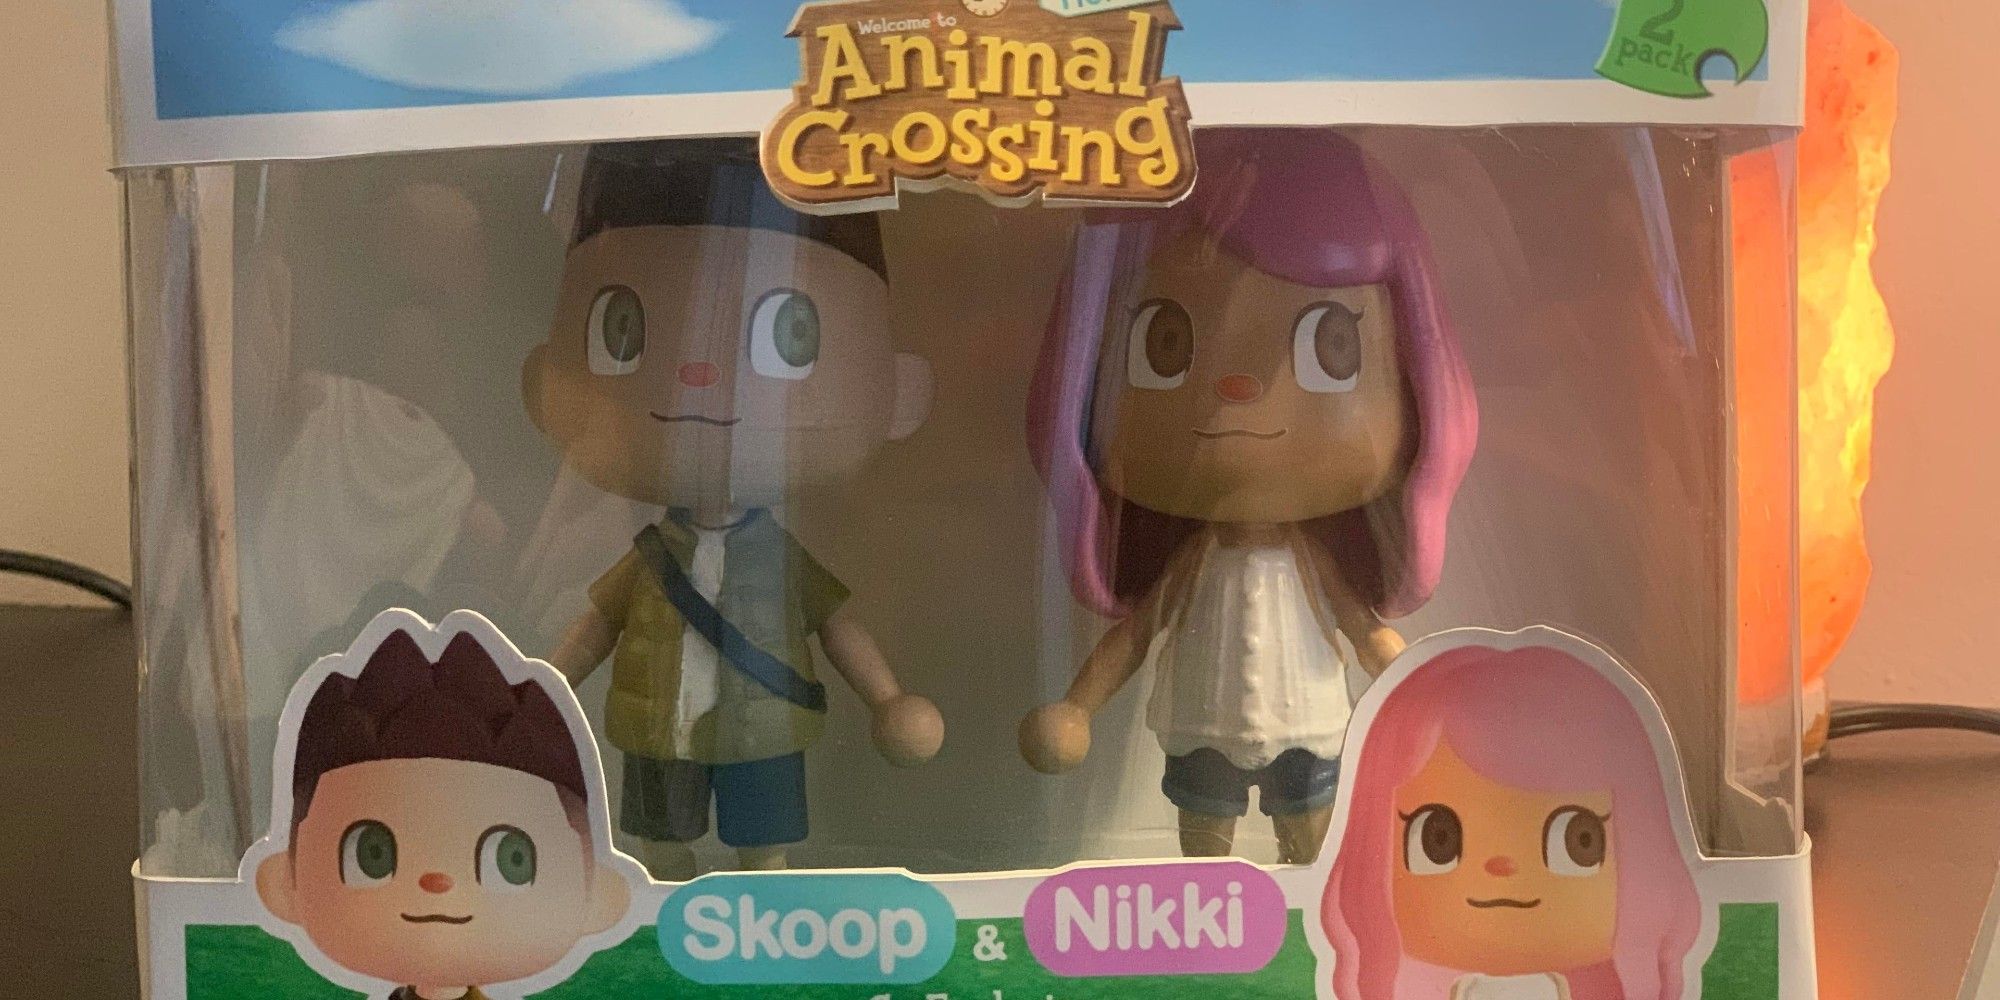 ACNH Fan Gifts Homemade Villager Figures, Complete With Packaging